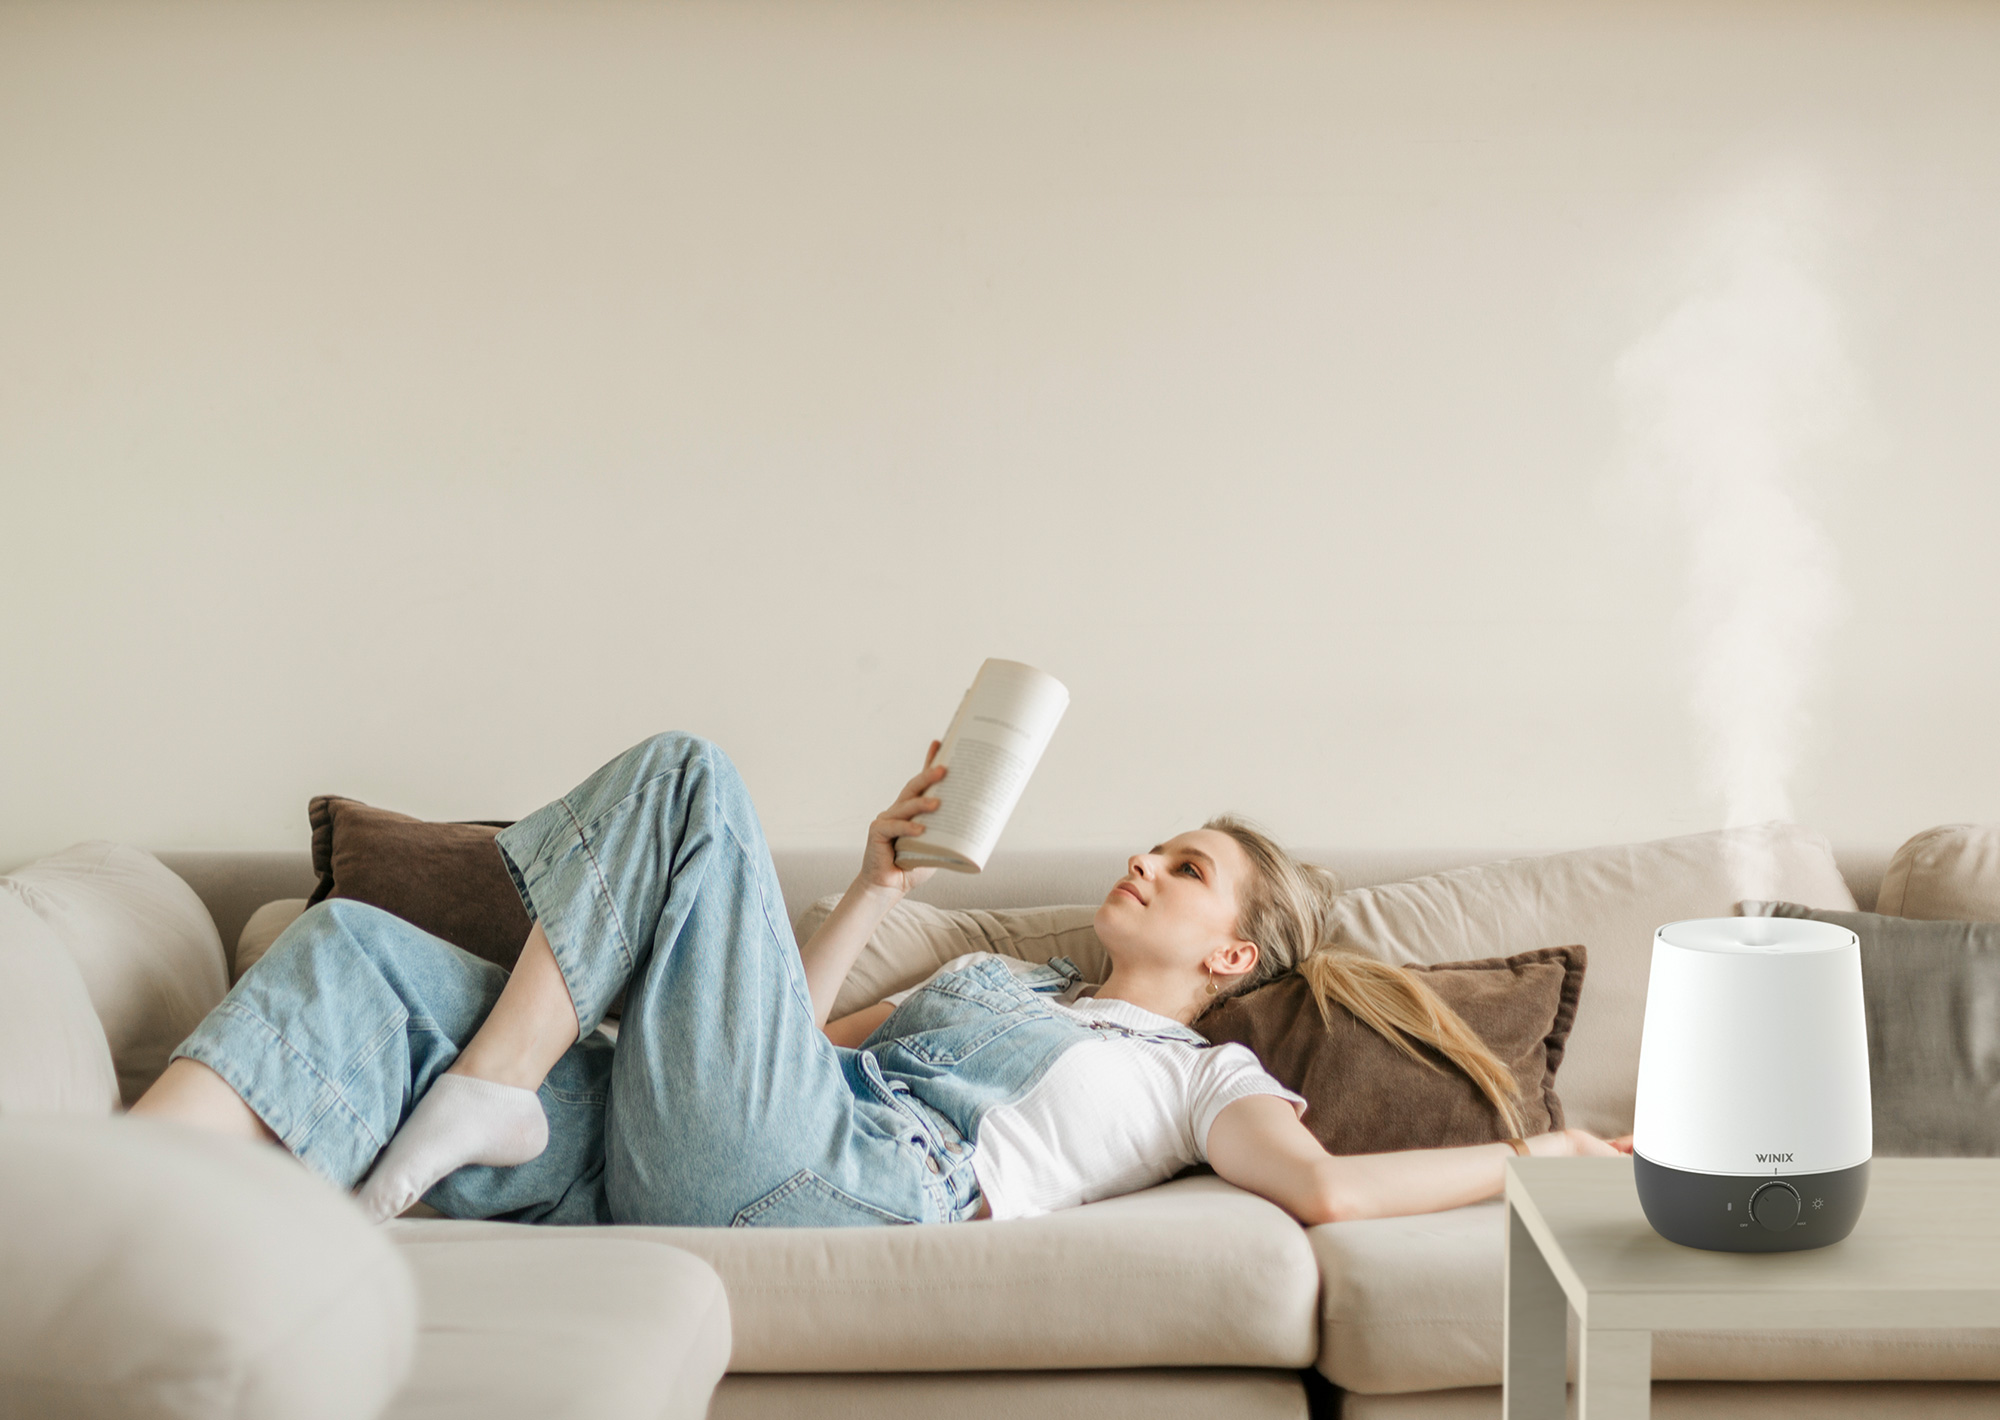 L61 Humidifier on coffee table next to woman relaxing on a couch